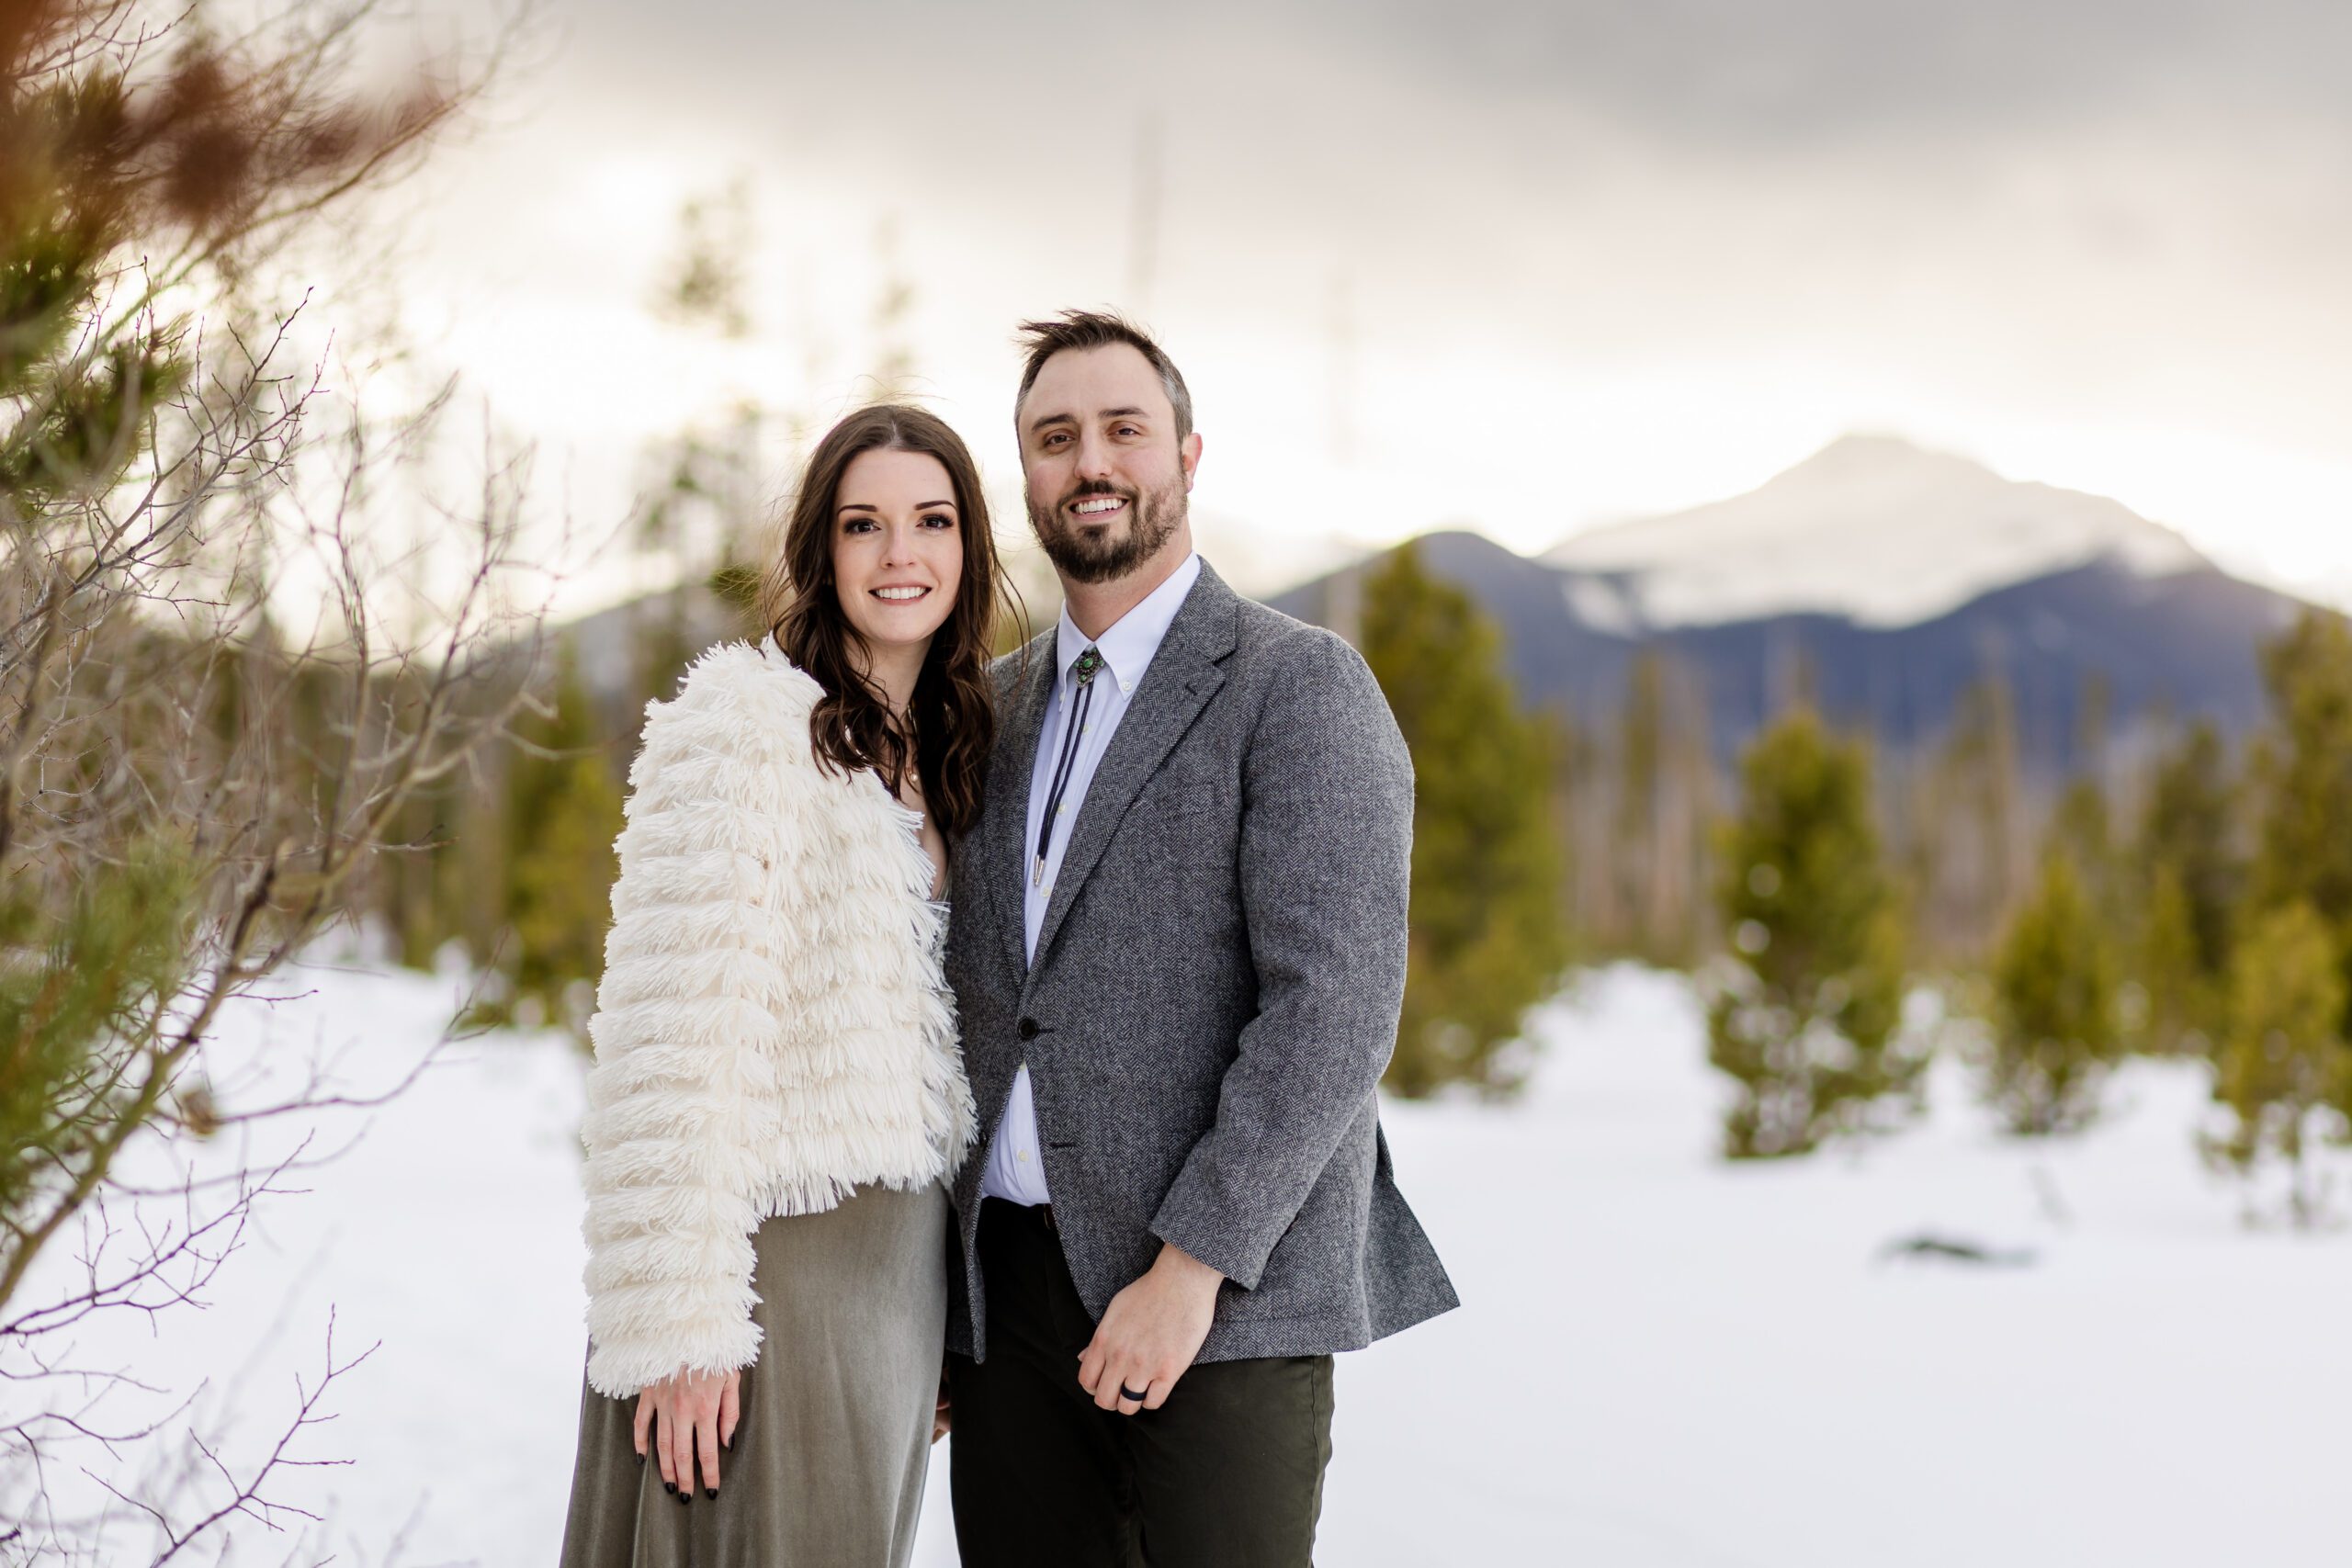 the bride and groom looking at the camera smiling at their Winter Park elopement.